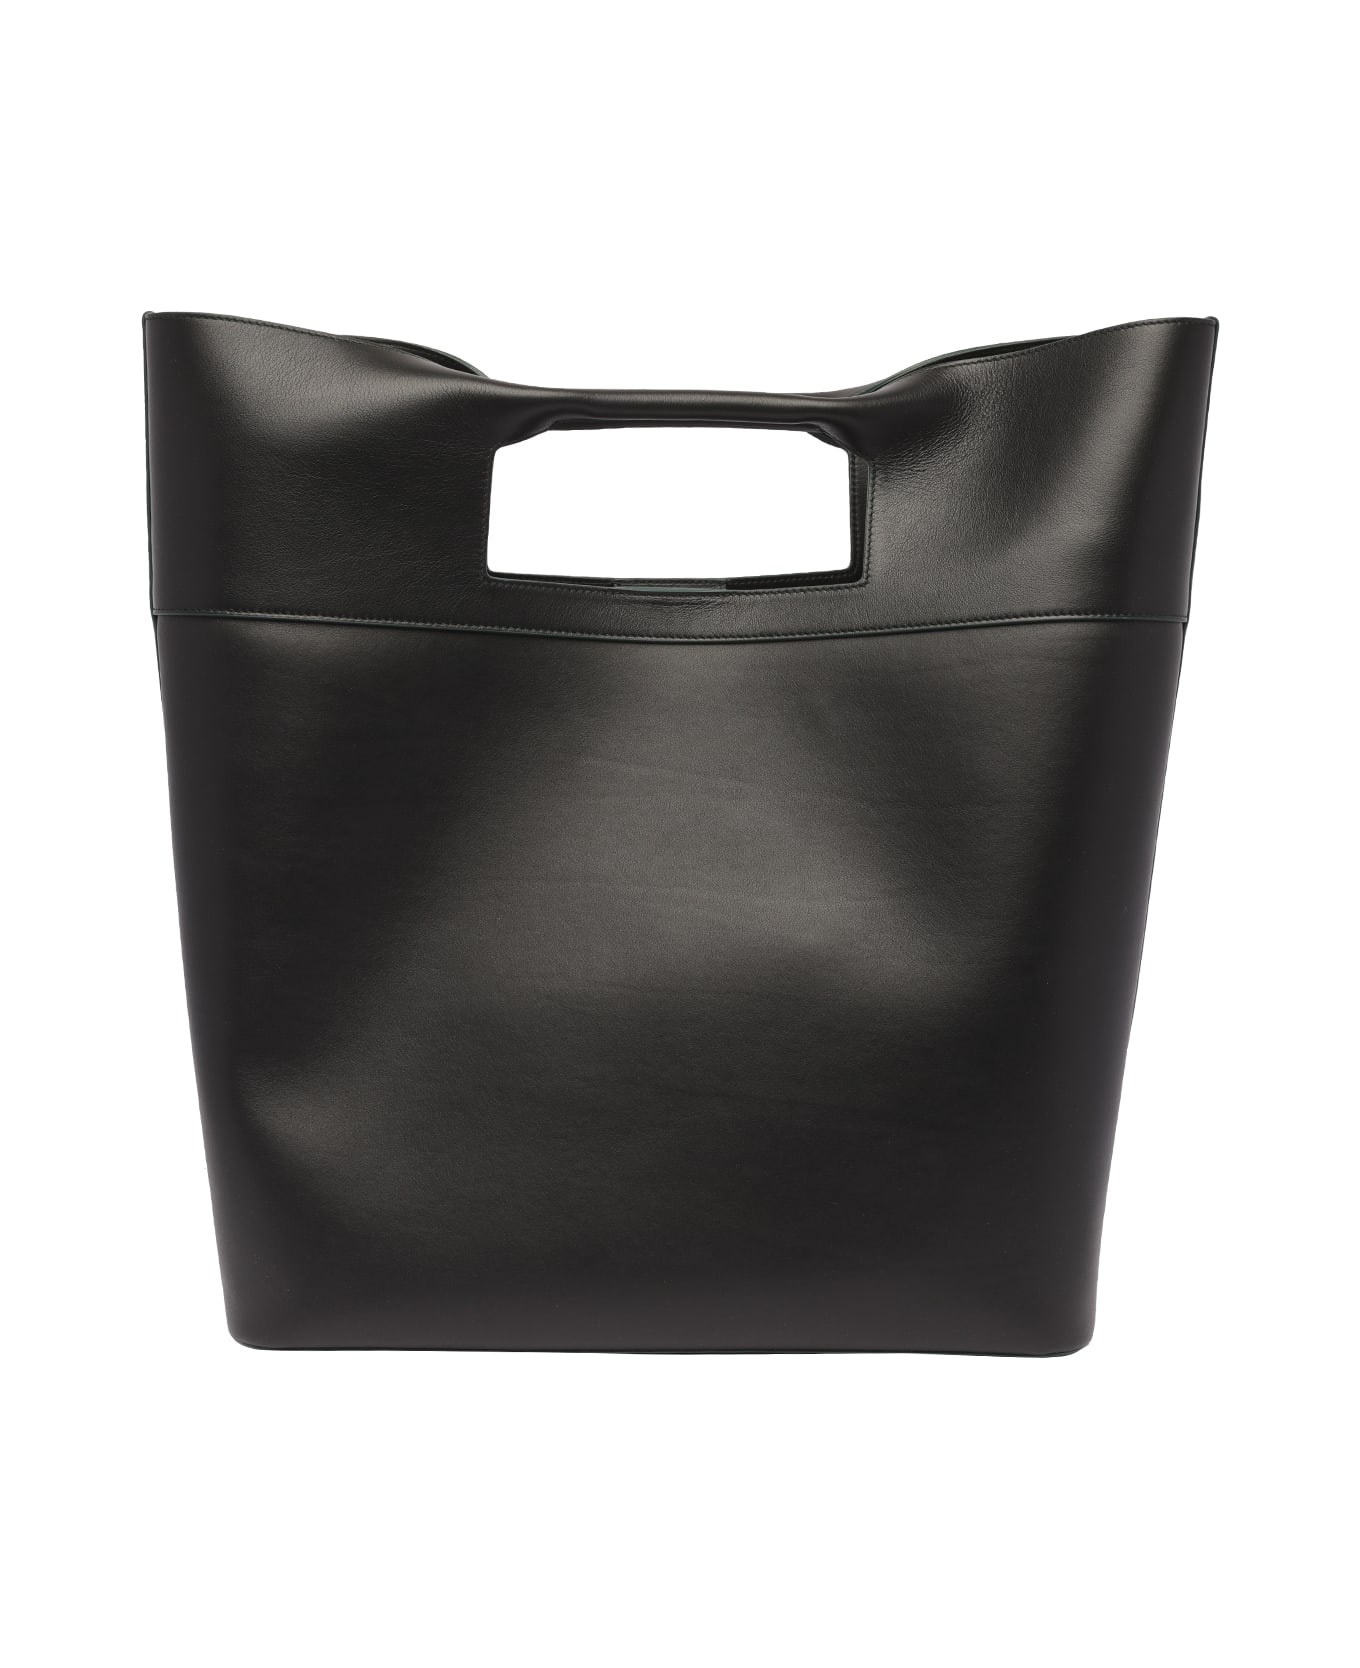 Alexander McQueen The Square Bow Bag - Black トートバッグ